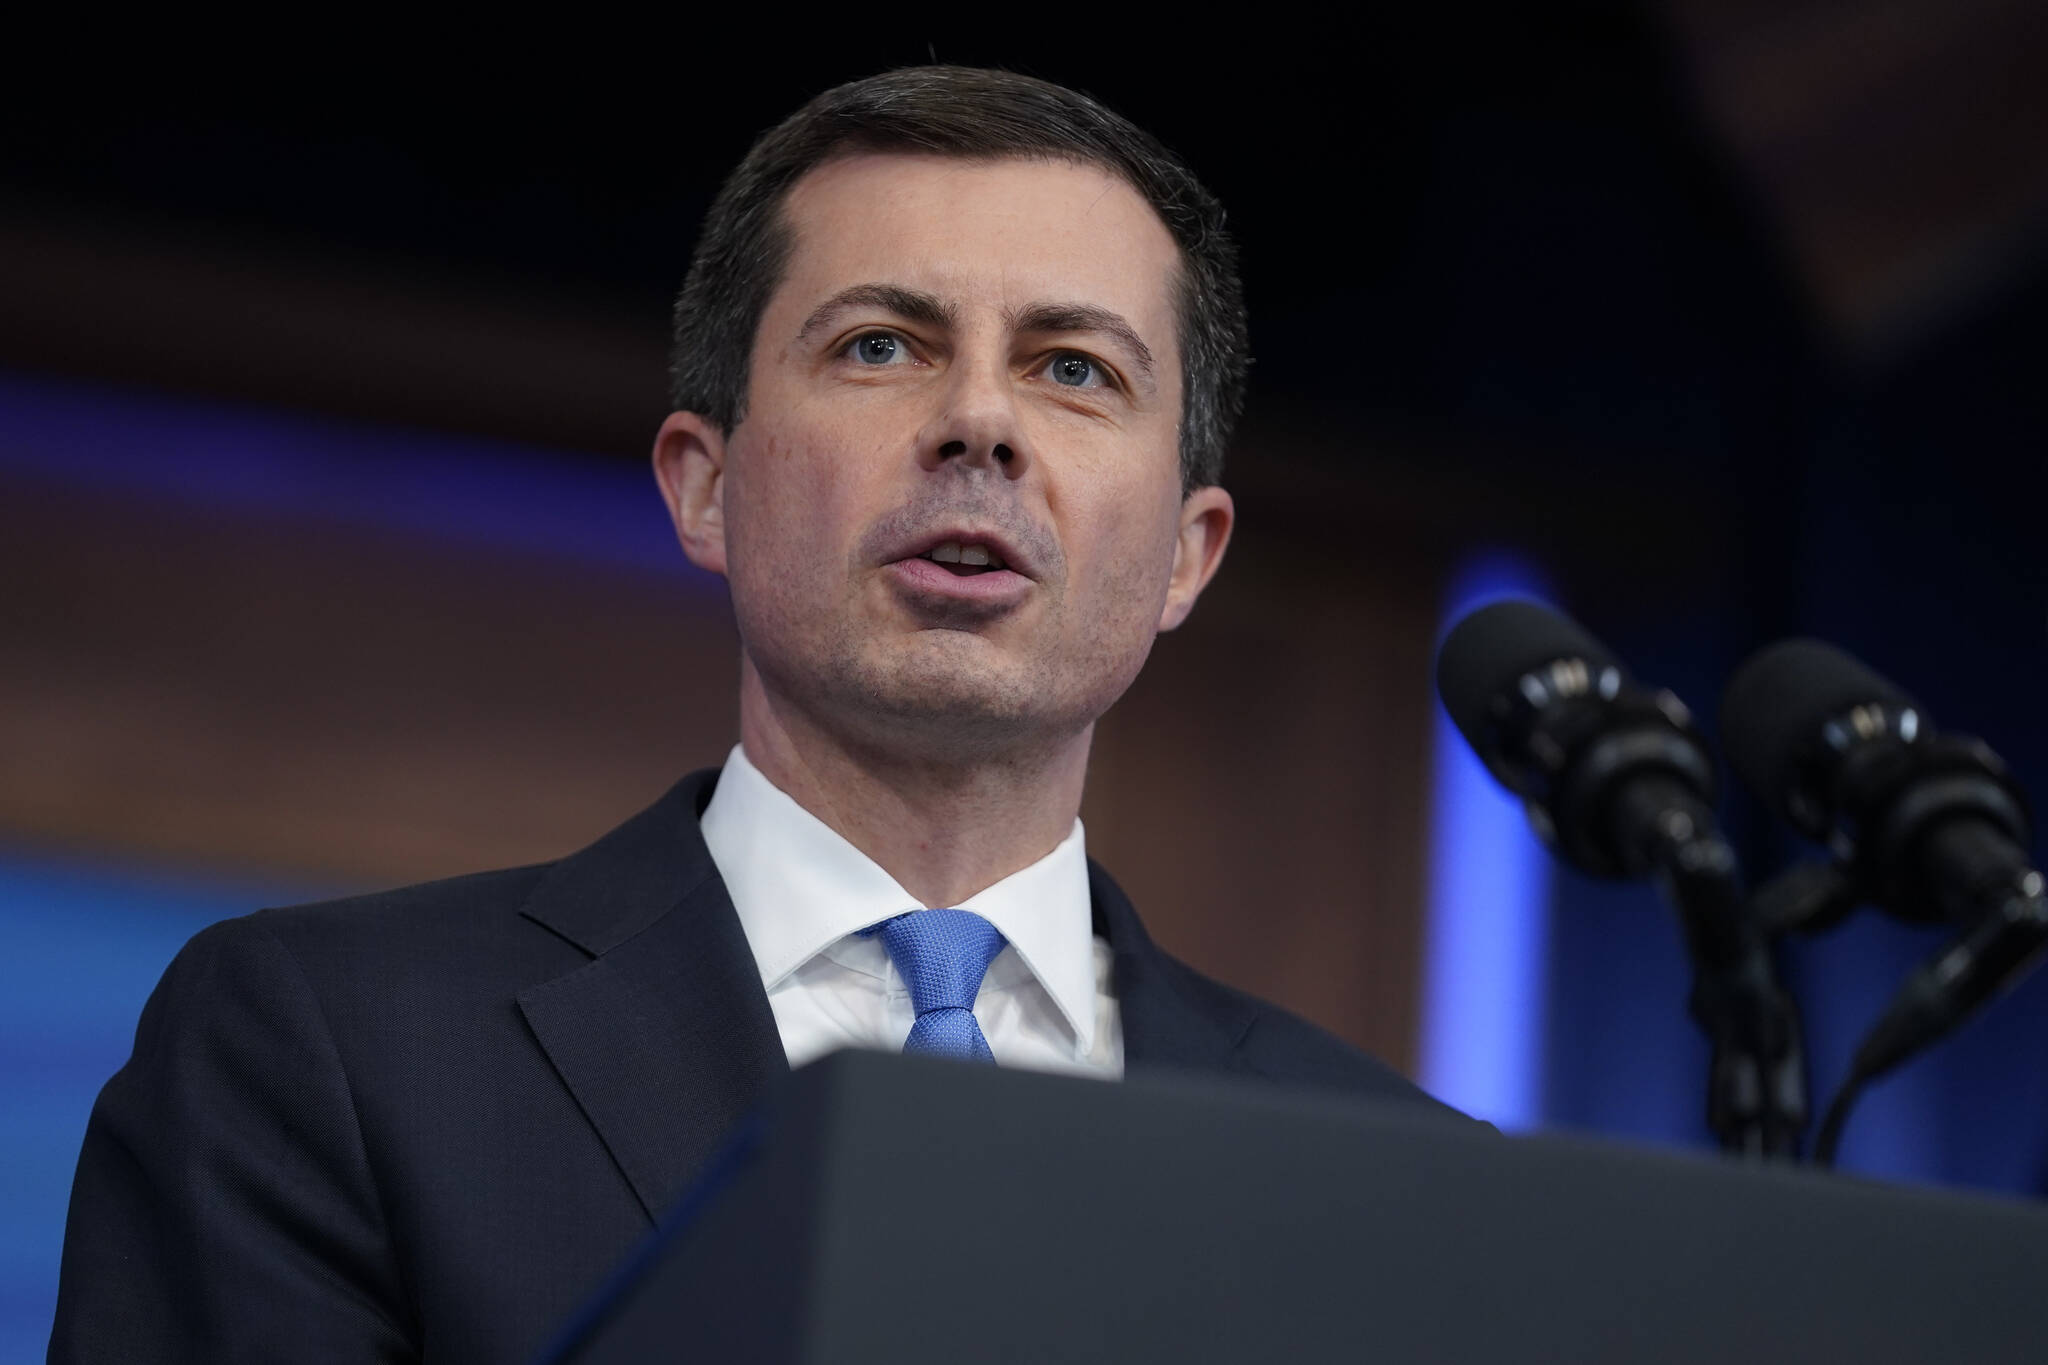 Transportation Secretary Pete Buttigieg gives a speech in Washington in early May. Buttigieg is expected to arrive in Juneau next Wednesday a part of a three-day tour traveling to several communities in Alaska. (AP Photo/Evan Vucci)